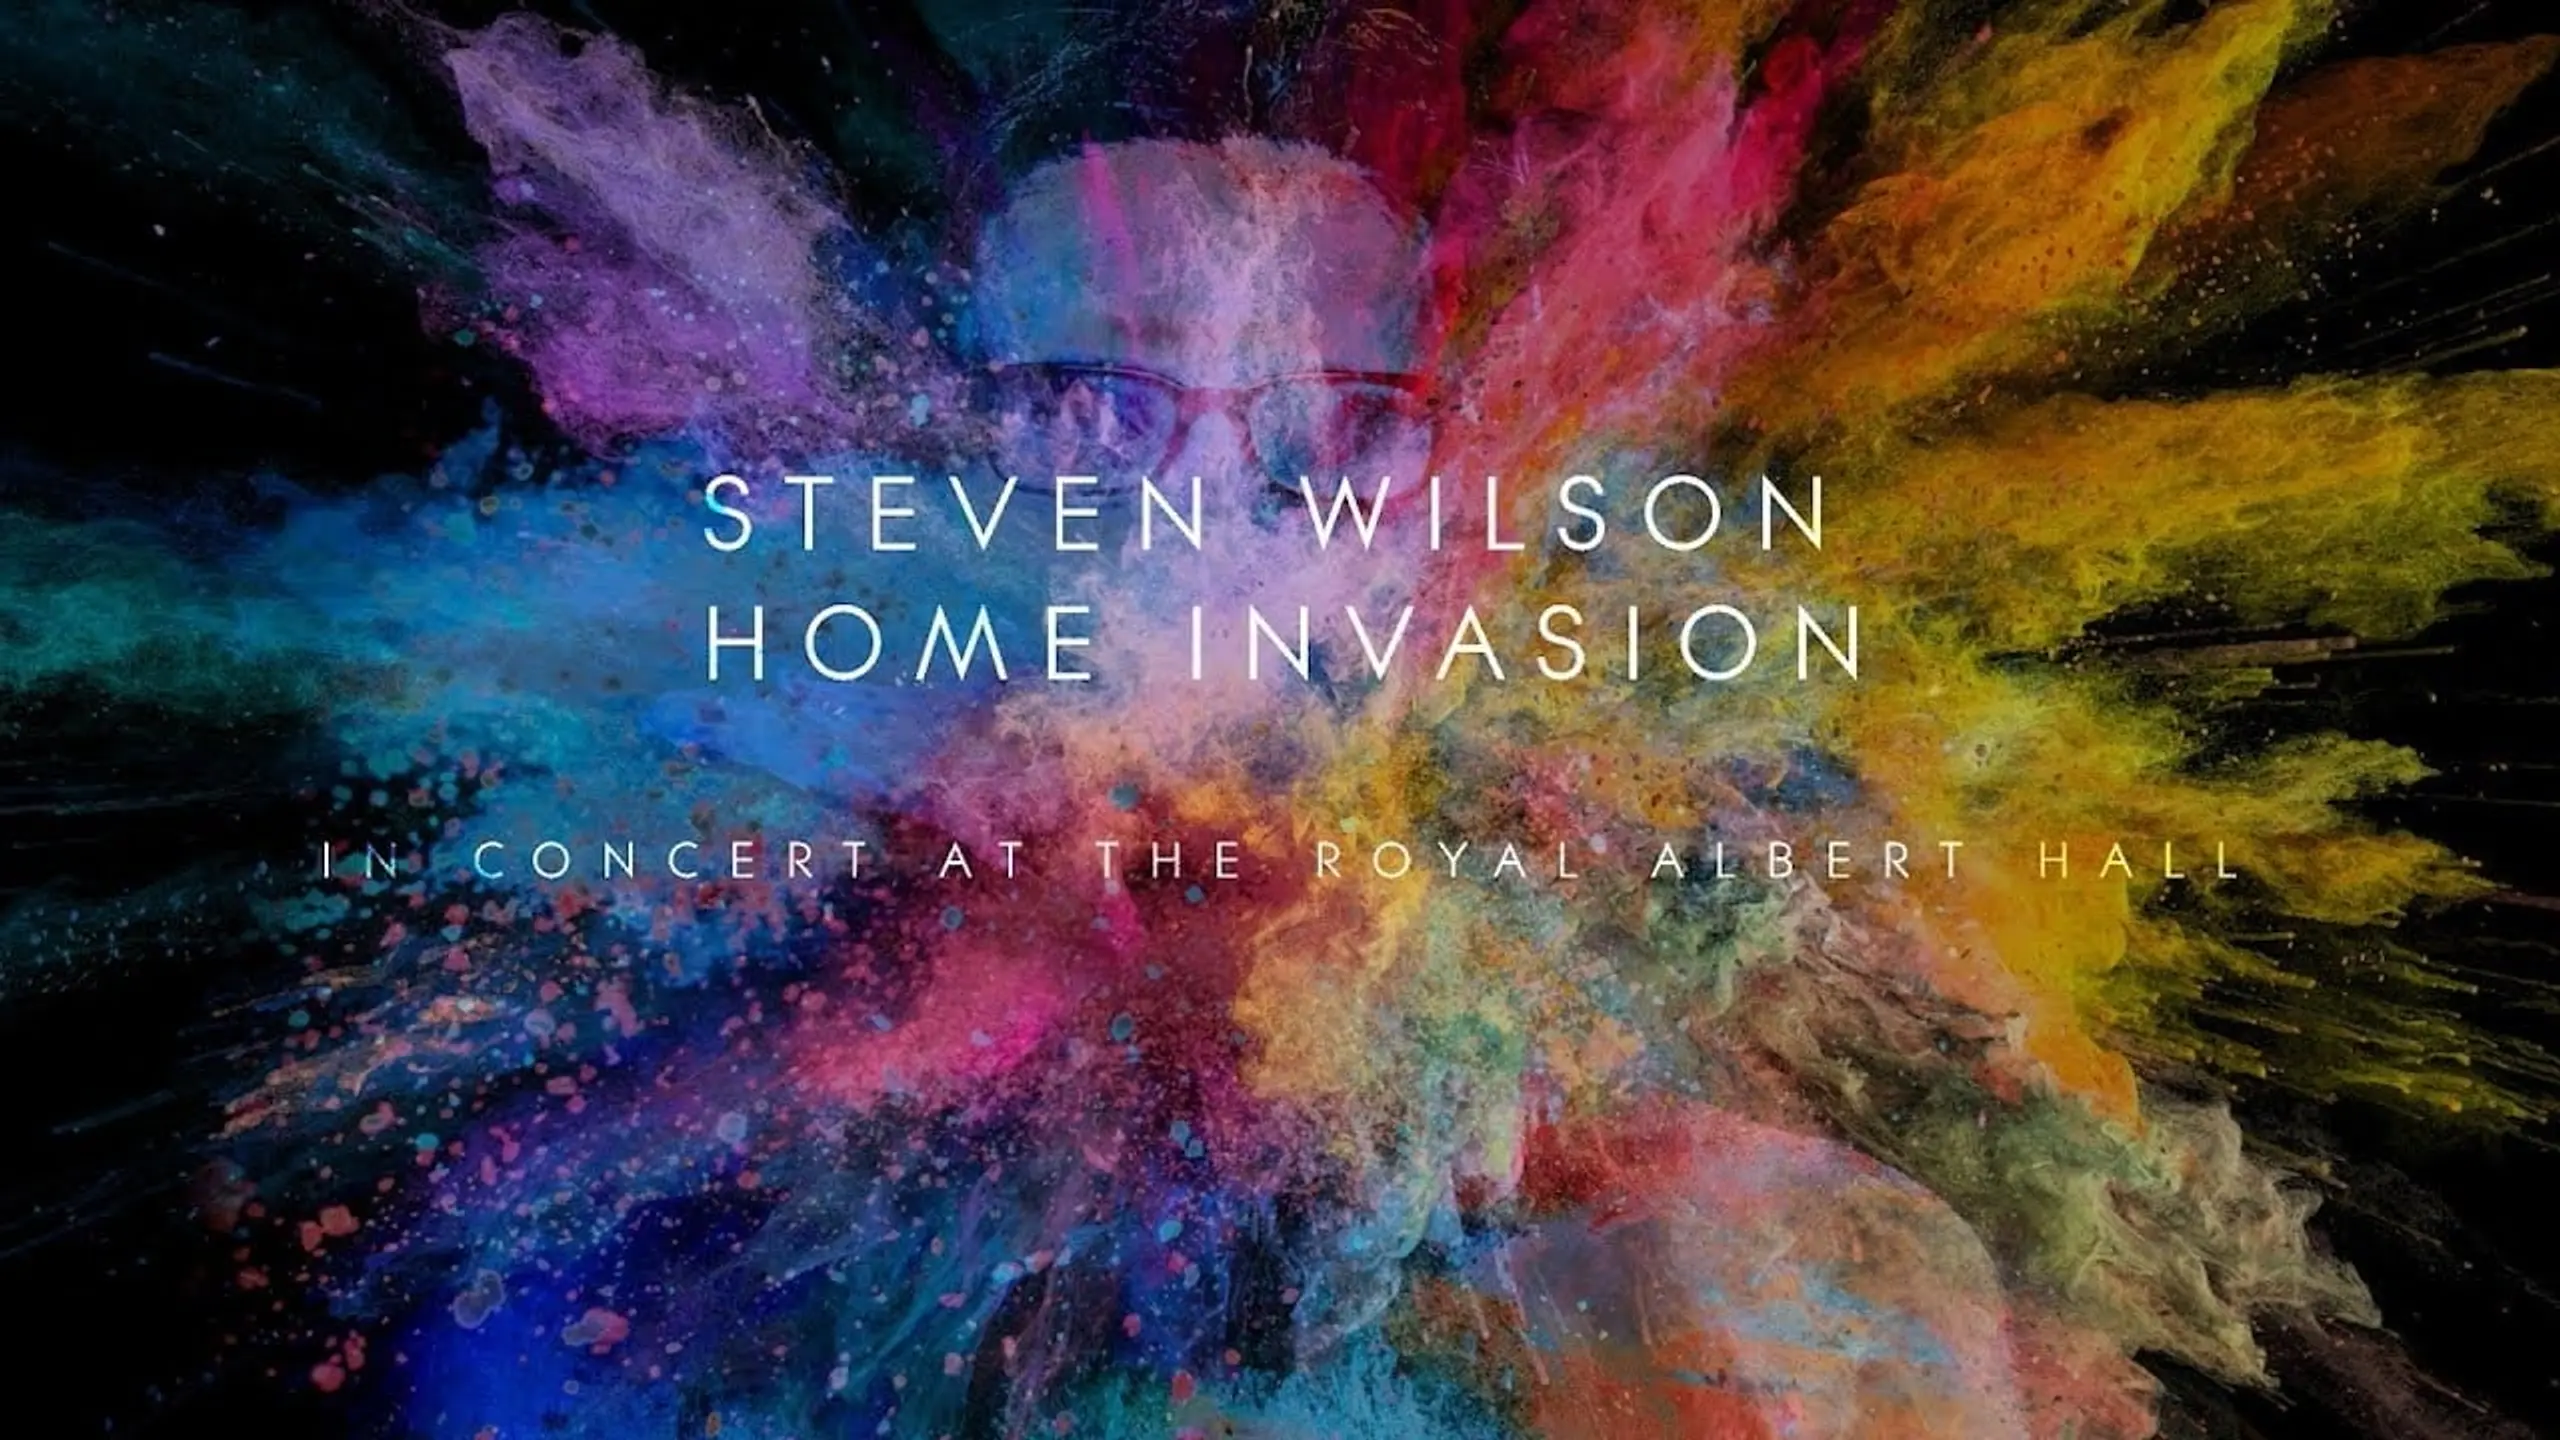 Steven Wilson: Home Invasion - In Concert at the Royal Albert Hall